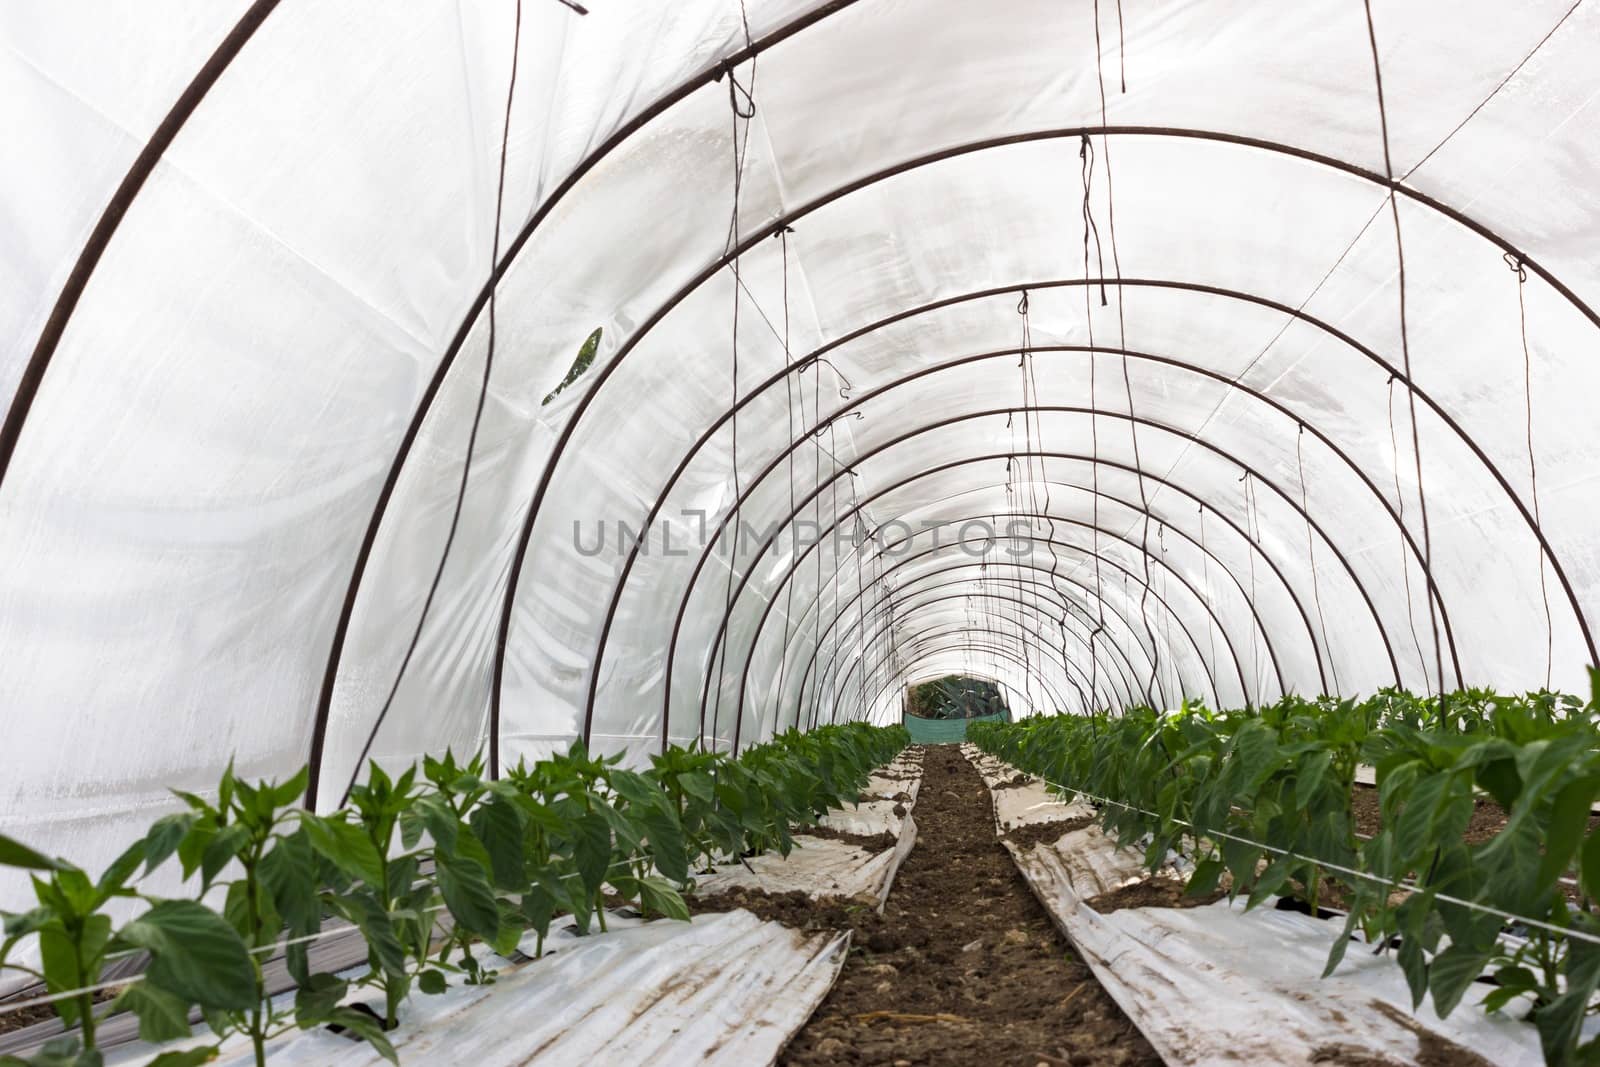 The microclimate created in greenhouses allows maturation of the product